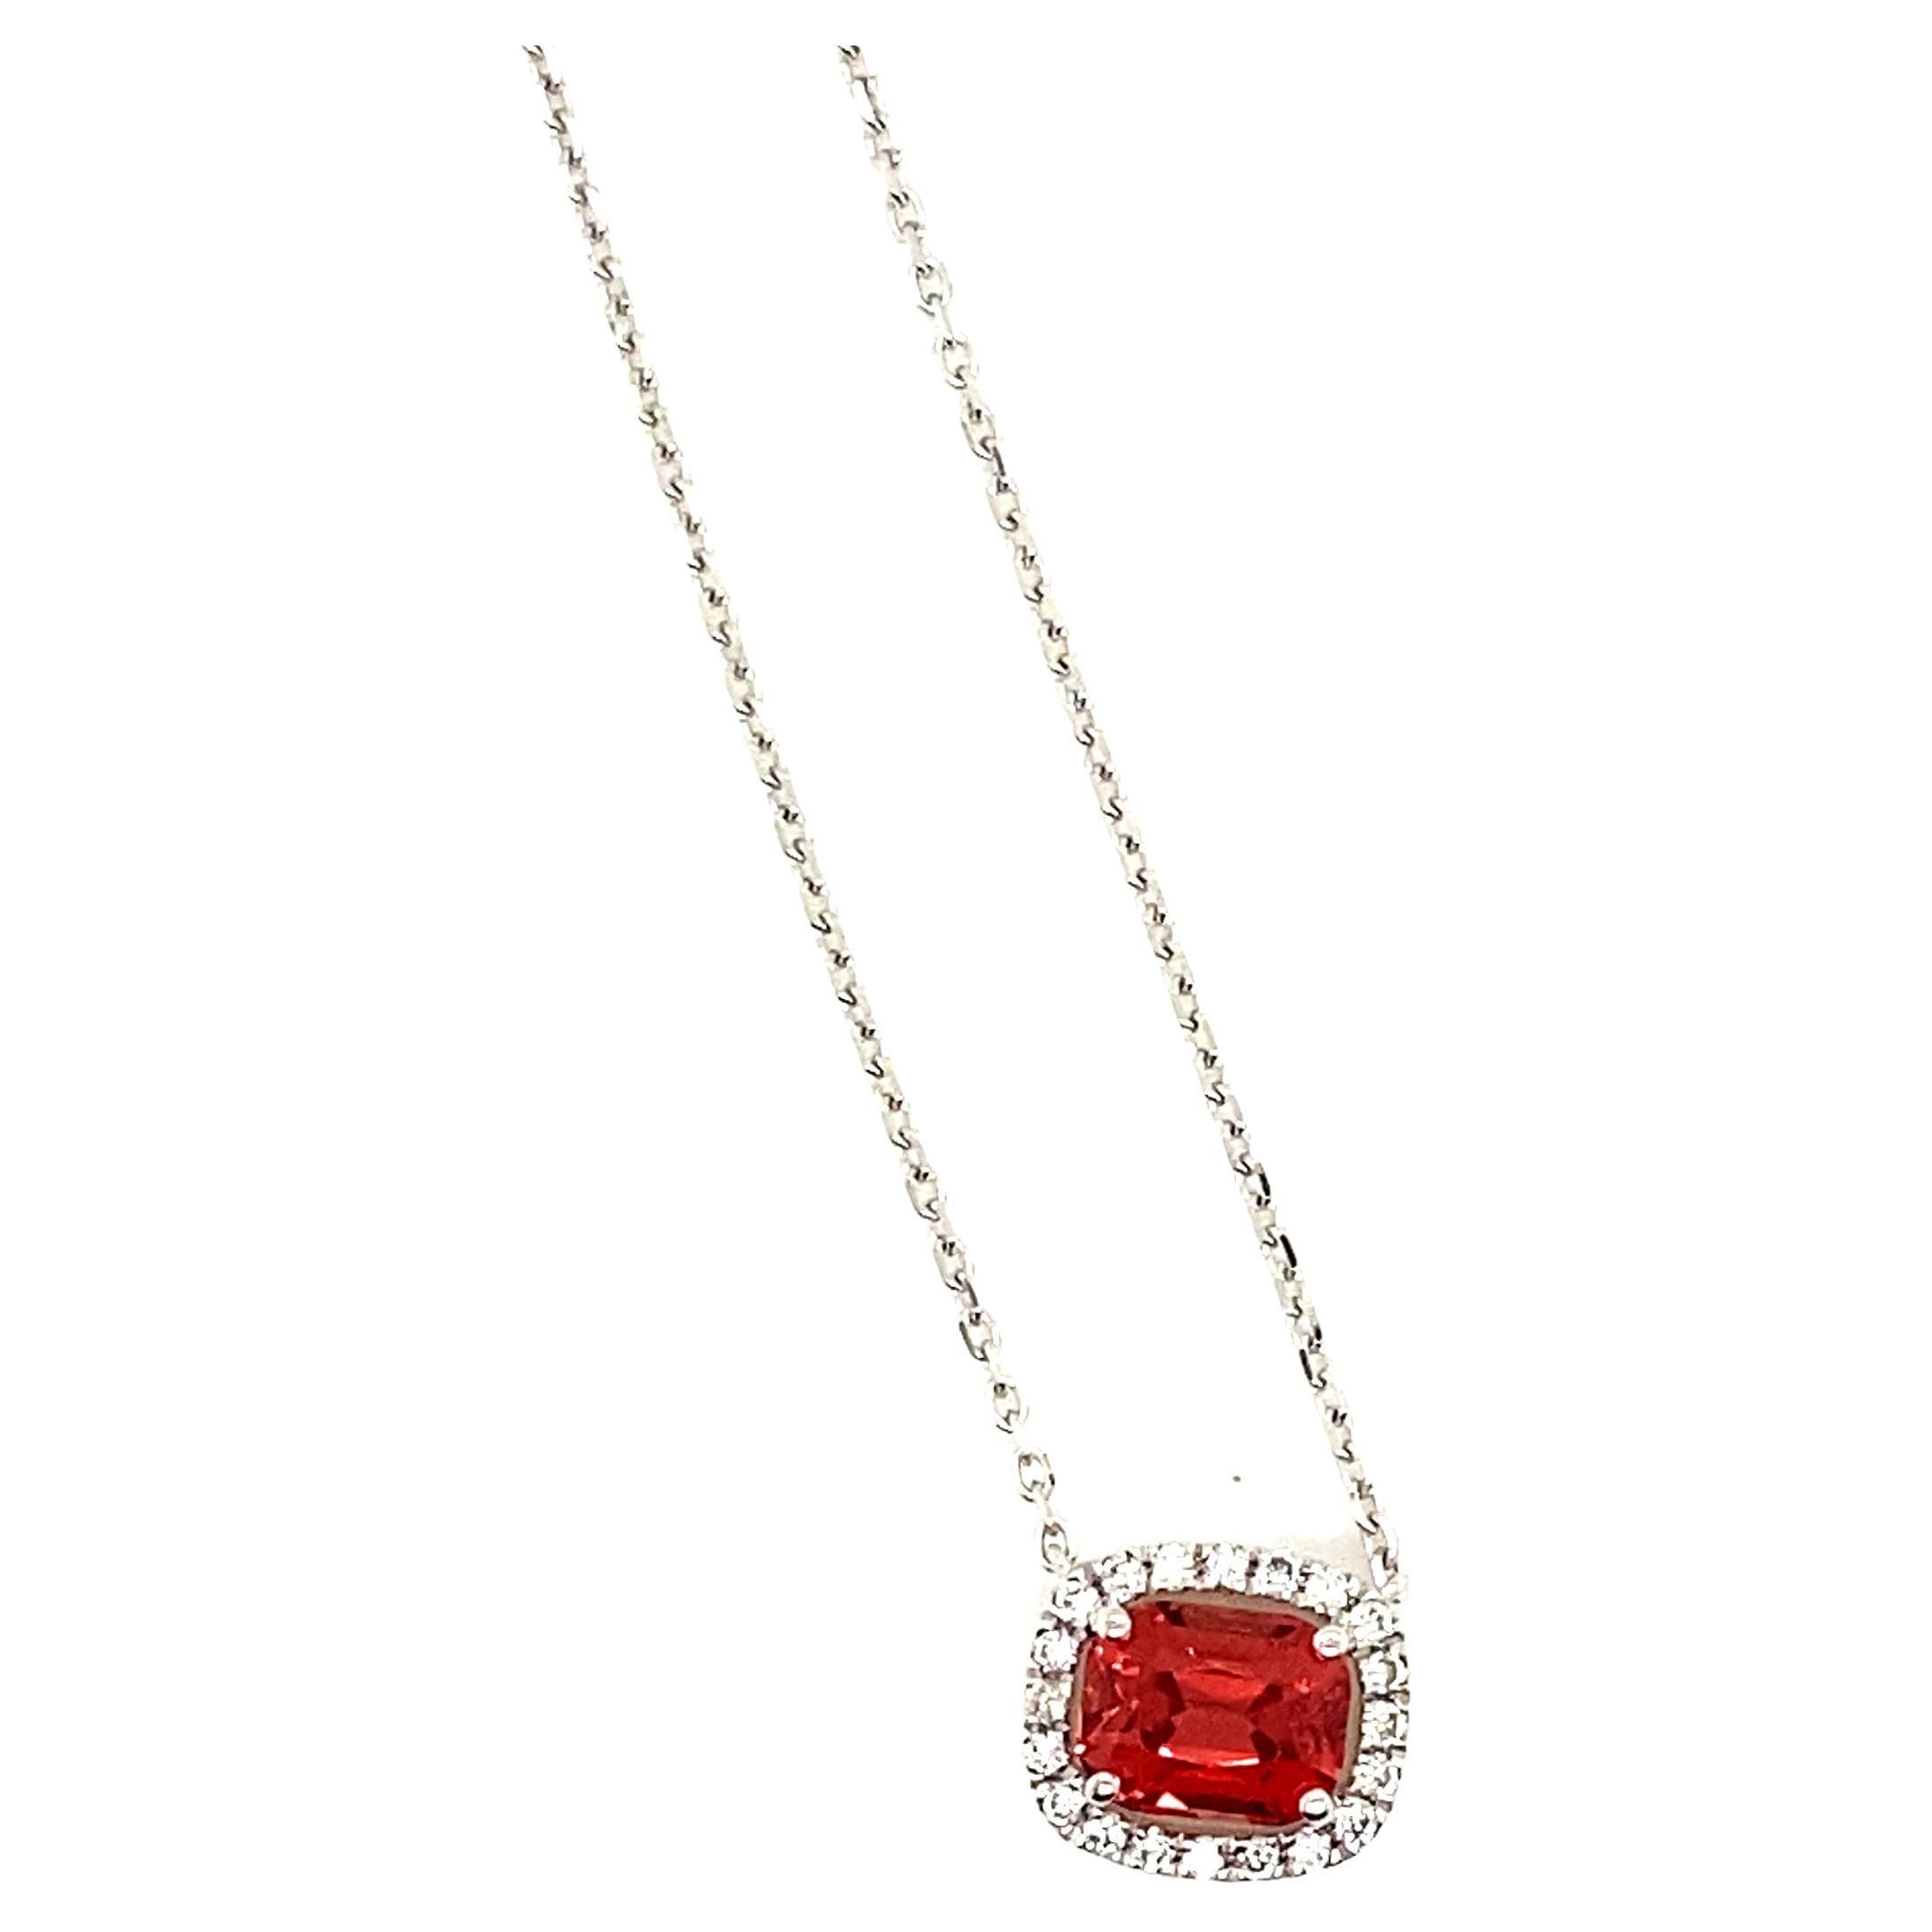 1.19 Carat Cushion-Cut Burma No Heat Spinel and White Diamond Pendant Necklace For Sale